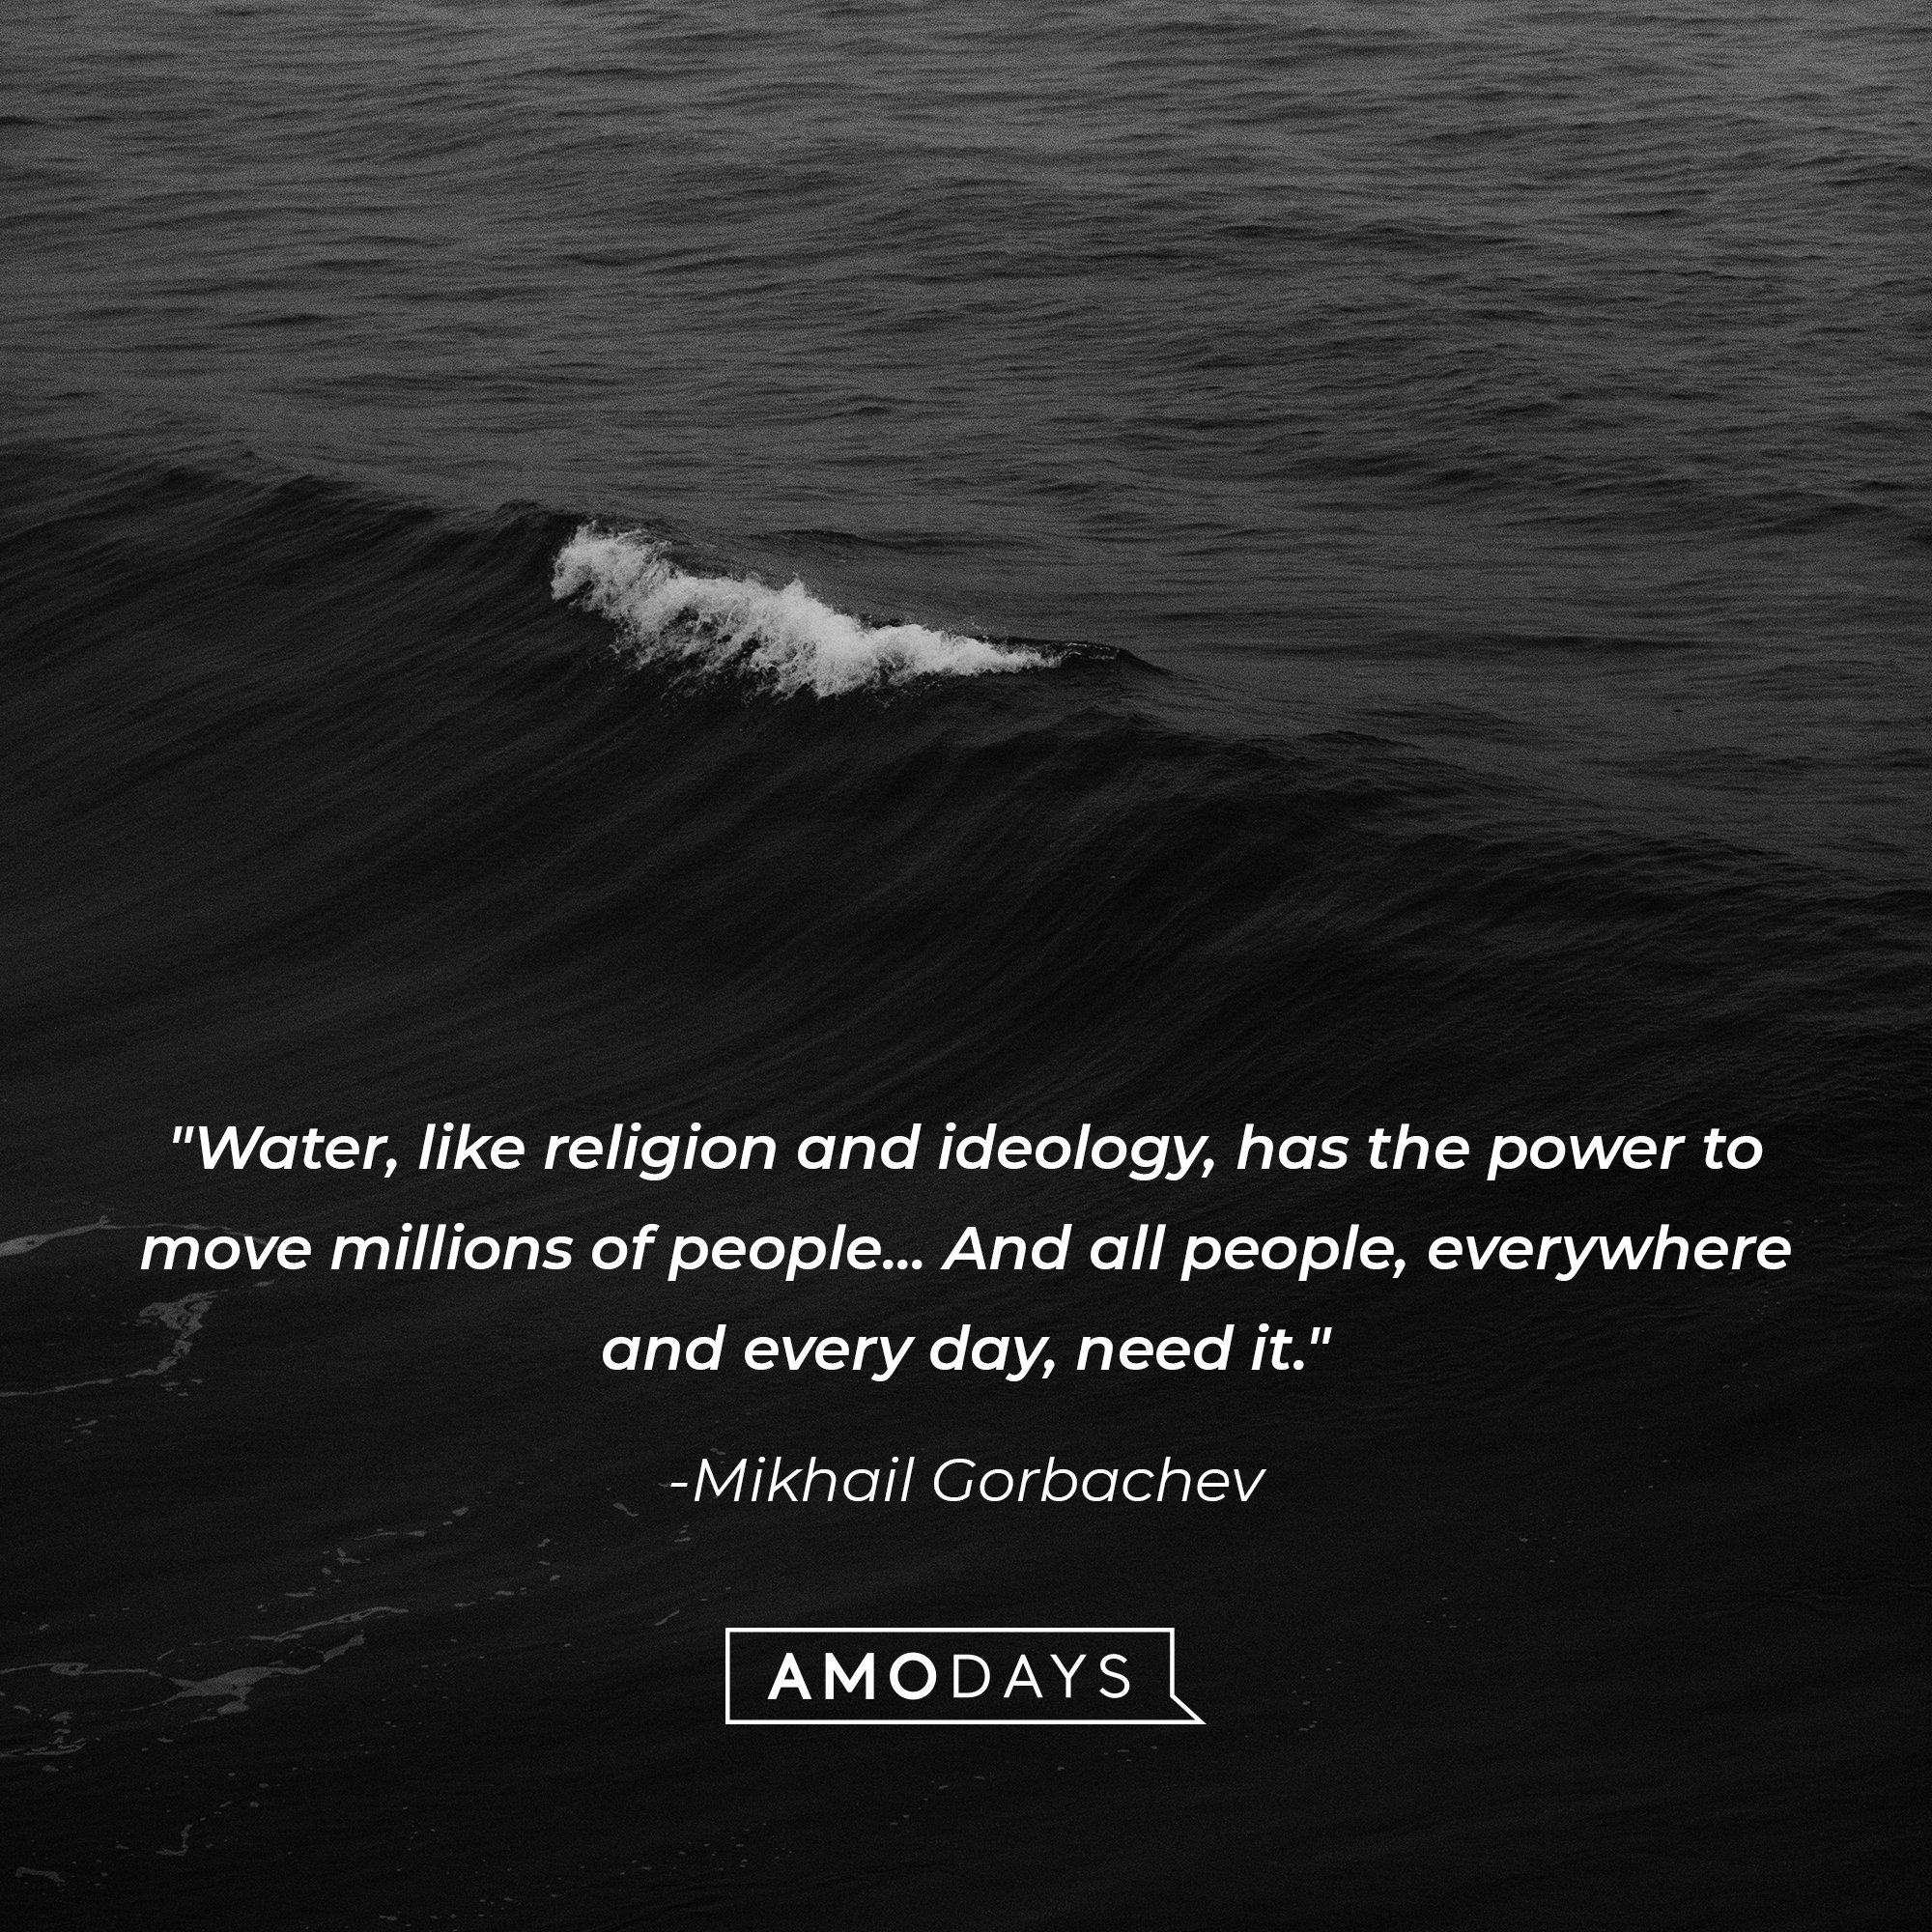 Mikhail Gorbachev’s quote: "Water, like religion and ideology, has the power to move millions of people... And all people, everywhere and every day, need it." | Image: AmoDays